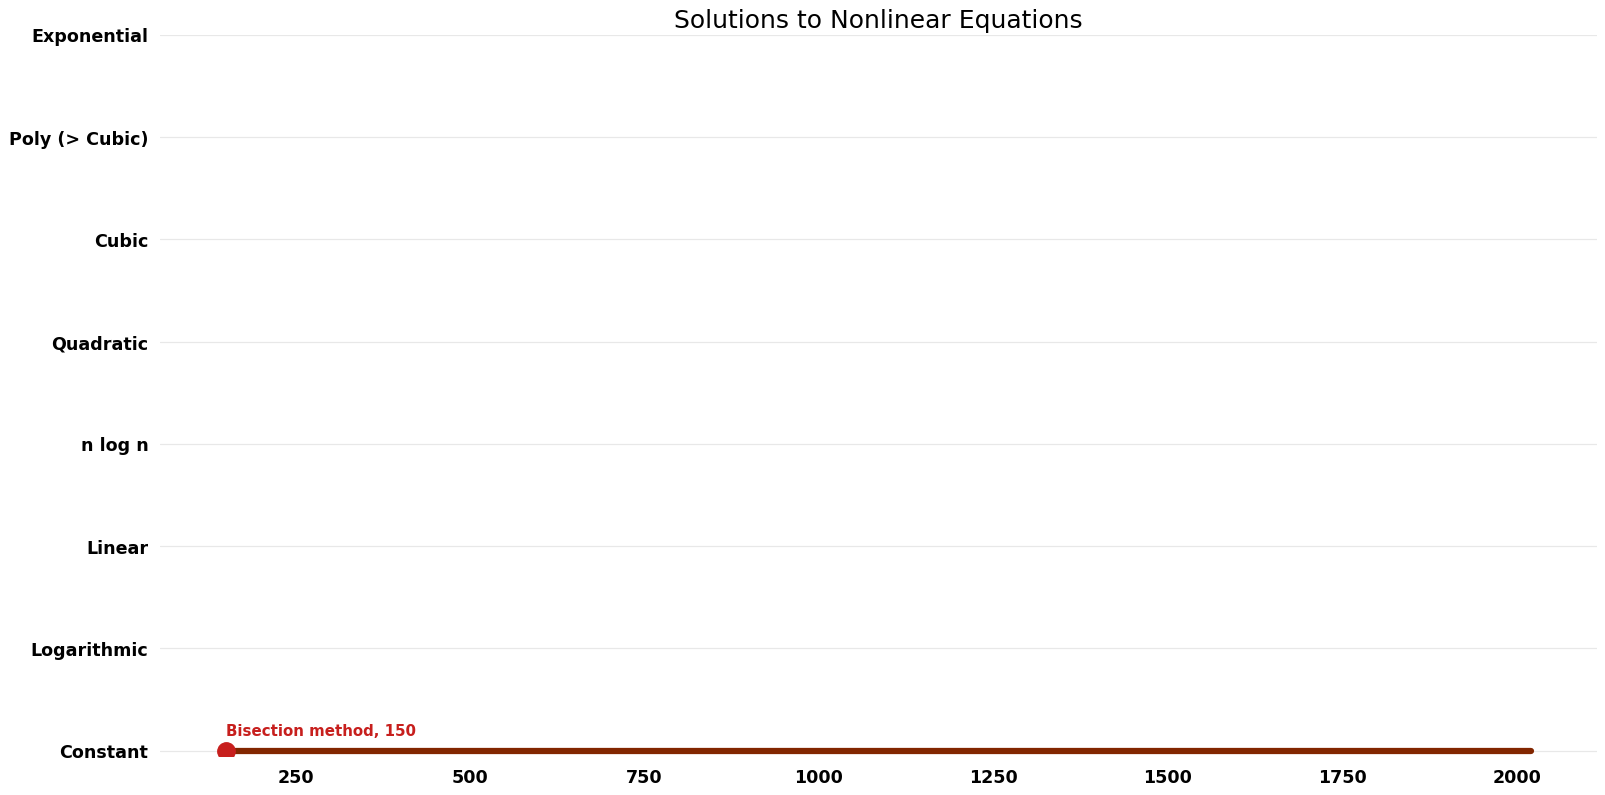 Solutions to Nonlinear Equations - Space.png